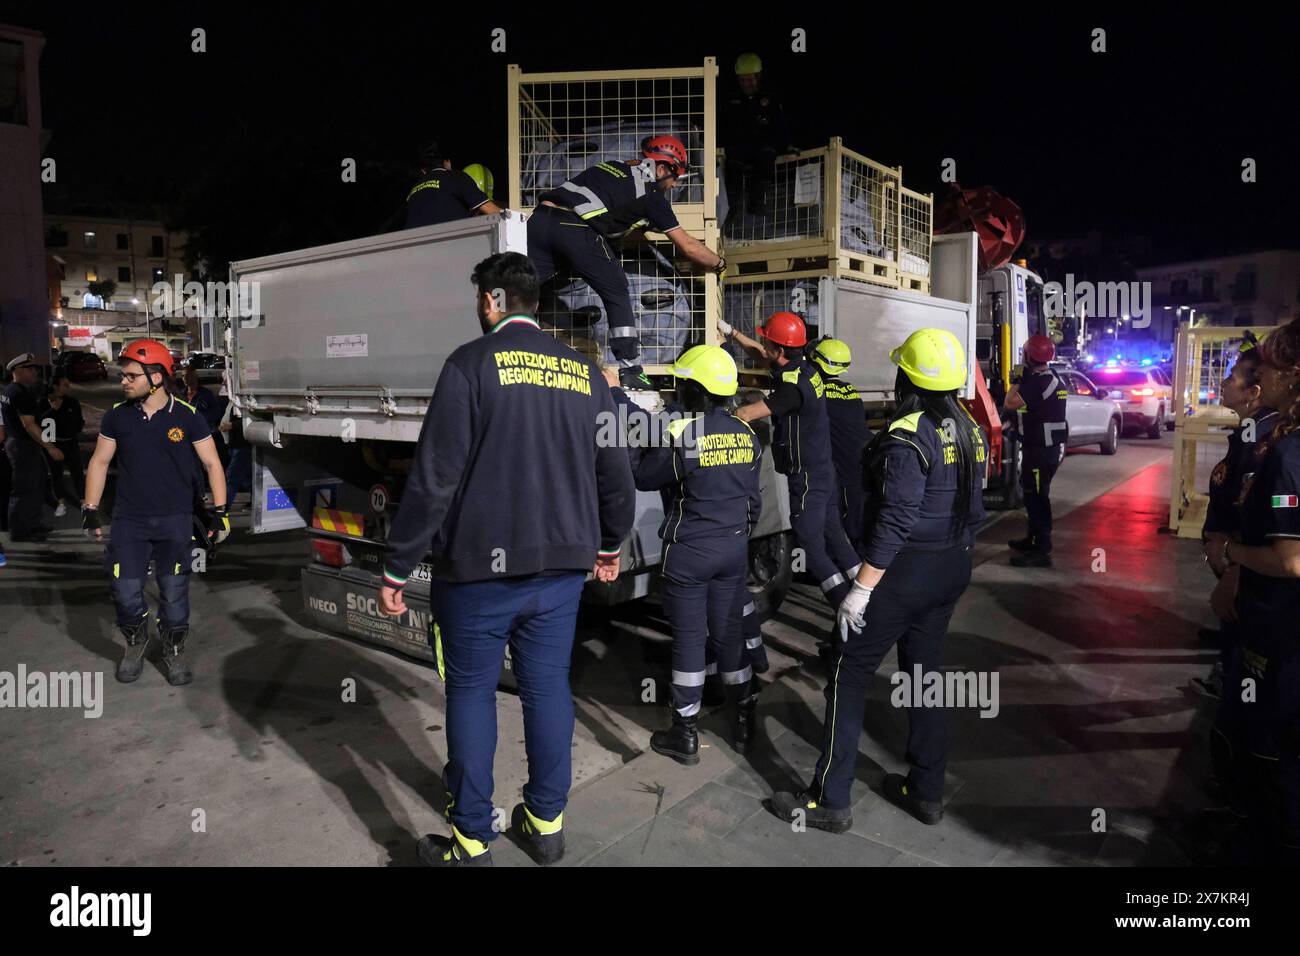 Italy: Campi Flegrei, bradisismo Campania s civil protection set up a tensile structure at the port of pozzuoli for people who are not confident about returning to their homes after the earthquake tremors, near Naples, southern Italy, 20 May 2024. The tremor that occurred at 8.10pm with epicentre in the Campi Flegrei was of magnitude 4.4. This was reported by the National Institute of Geophysics and Volcanology, according to which the depth of the quake was three kilometres. ABP01657 Copyright: xAntonioxBalascox Stock Photo